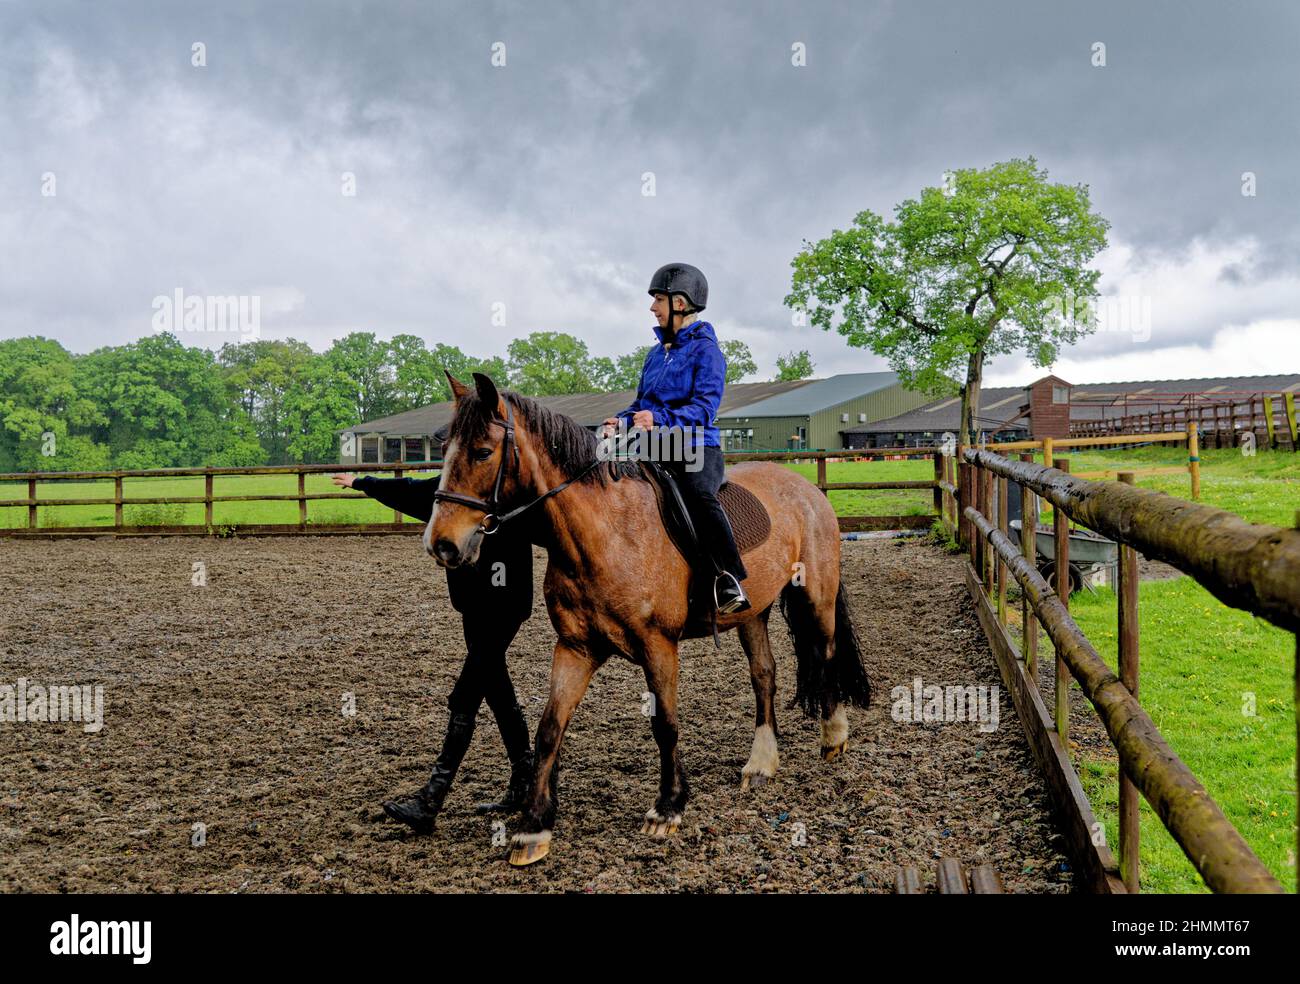 Girl having her first horse riding lesson bareback with hard hat helmet and instructor. Wellington Riding School, Hook, United Kingdom. 11.05.2016 Stock Photo